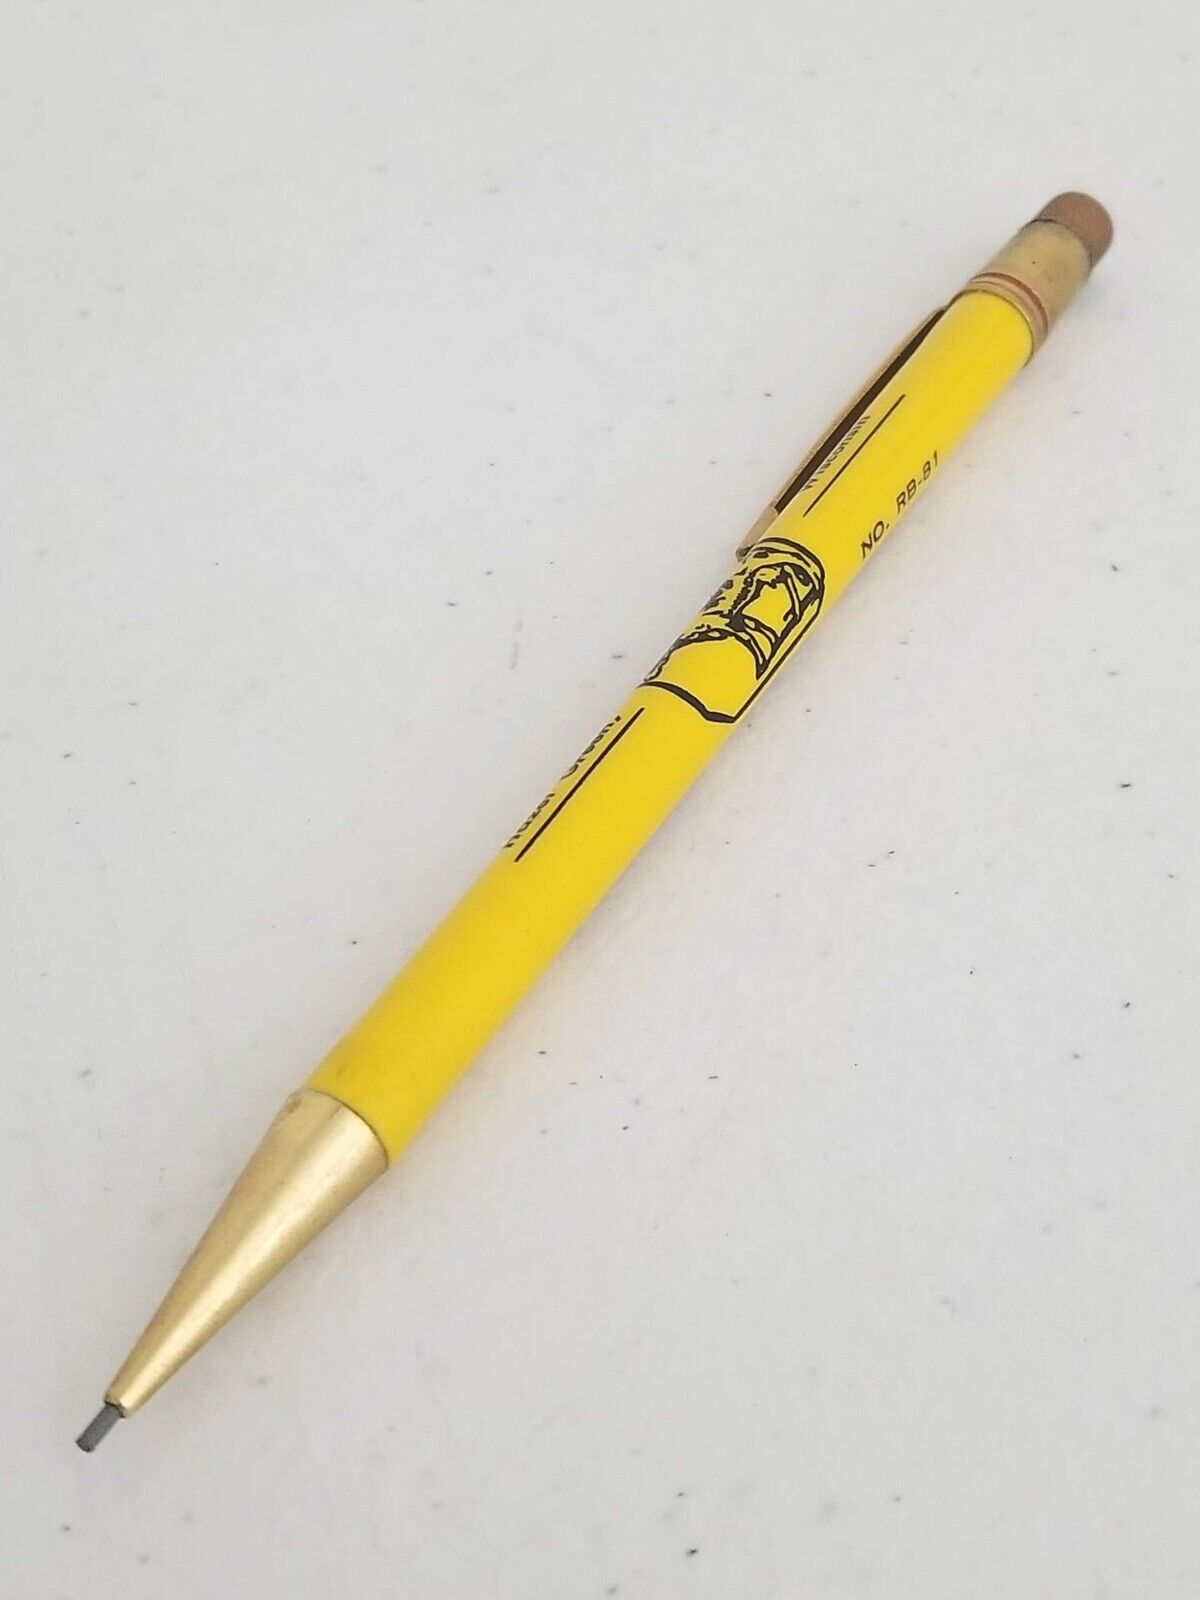 Vintage Apco Advertising Mechanical Pencil Yellow & Gold Collectible Writing Too